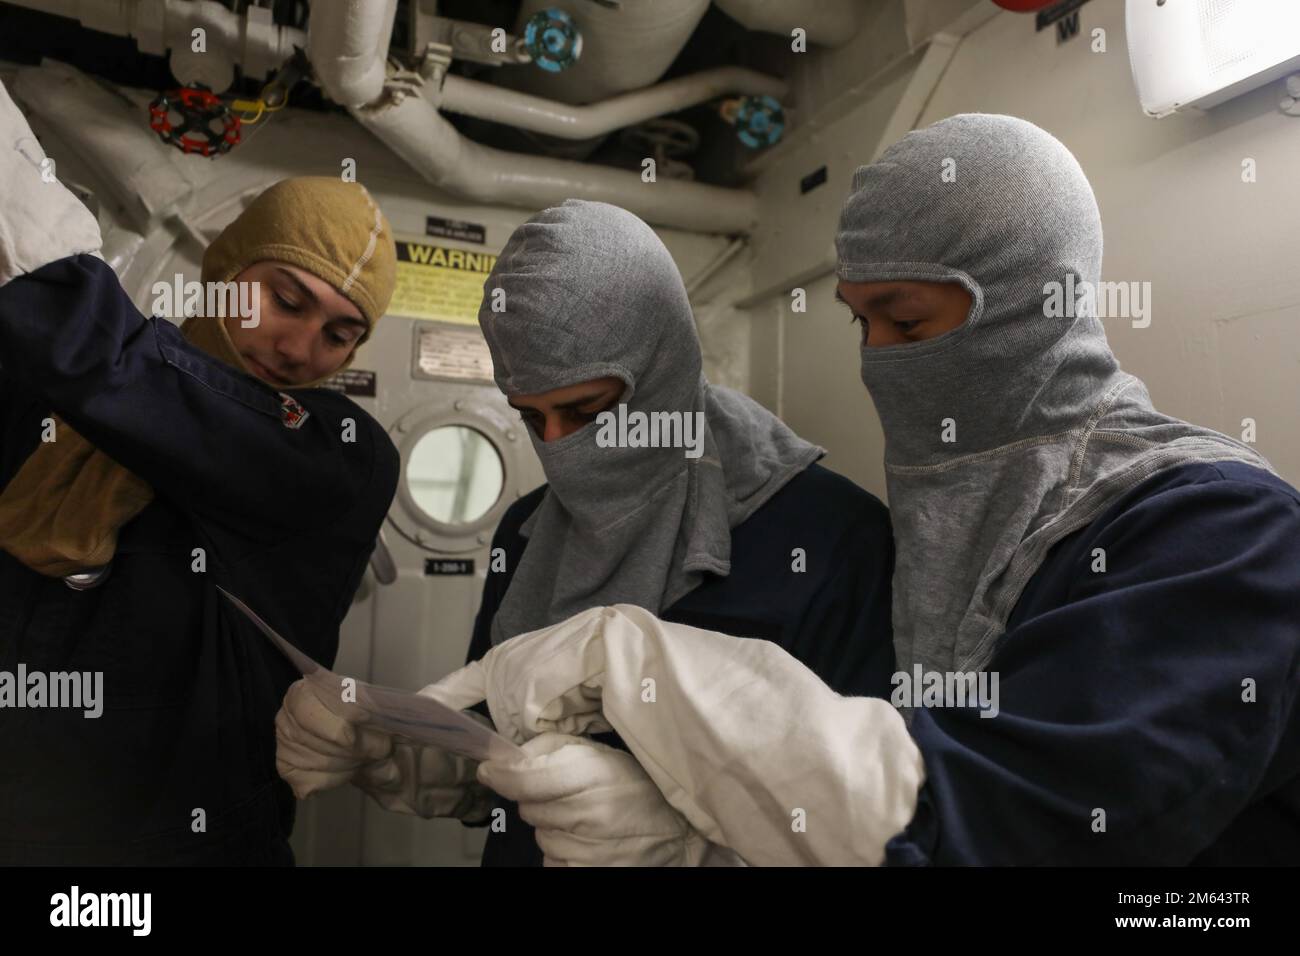 NORTH ATLANTIC OCEAN (March 31, 2022) Operations Specialist Seaman Aldwin Zarate, right, Gas Turbine Systems Technician (Electrical) Miguel Santana, middle, and Damage Controlman 3rd Class Jeffrey Allen read a material condition zebra card during a general quarters drill aboard the Arleigh Burke-class guided-missile destroyer USS Roosevelt (DDG 80), March 31, 2022. Roosevelt, forward-deployed to Rota, Spain, is on its third patrol in the U.S. Sixth Fleet area of operations in support of regional allies and partners and U.S. national security interests in Europe and Africa. Stock Photo